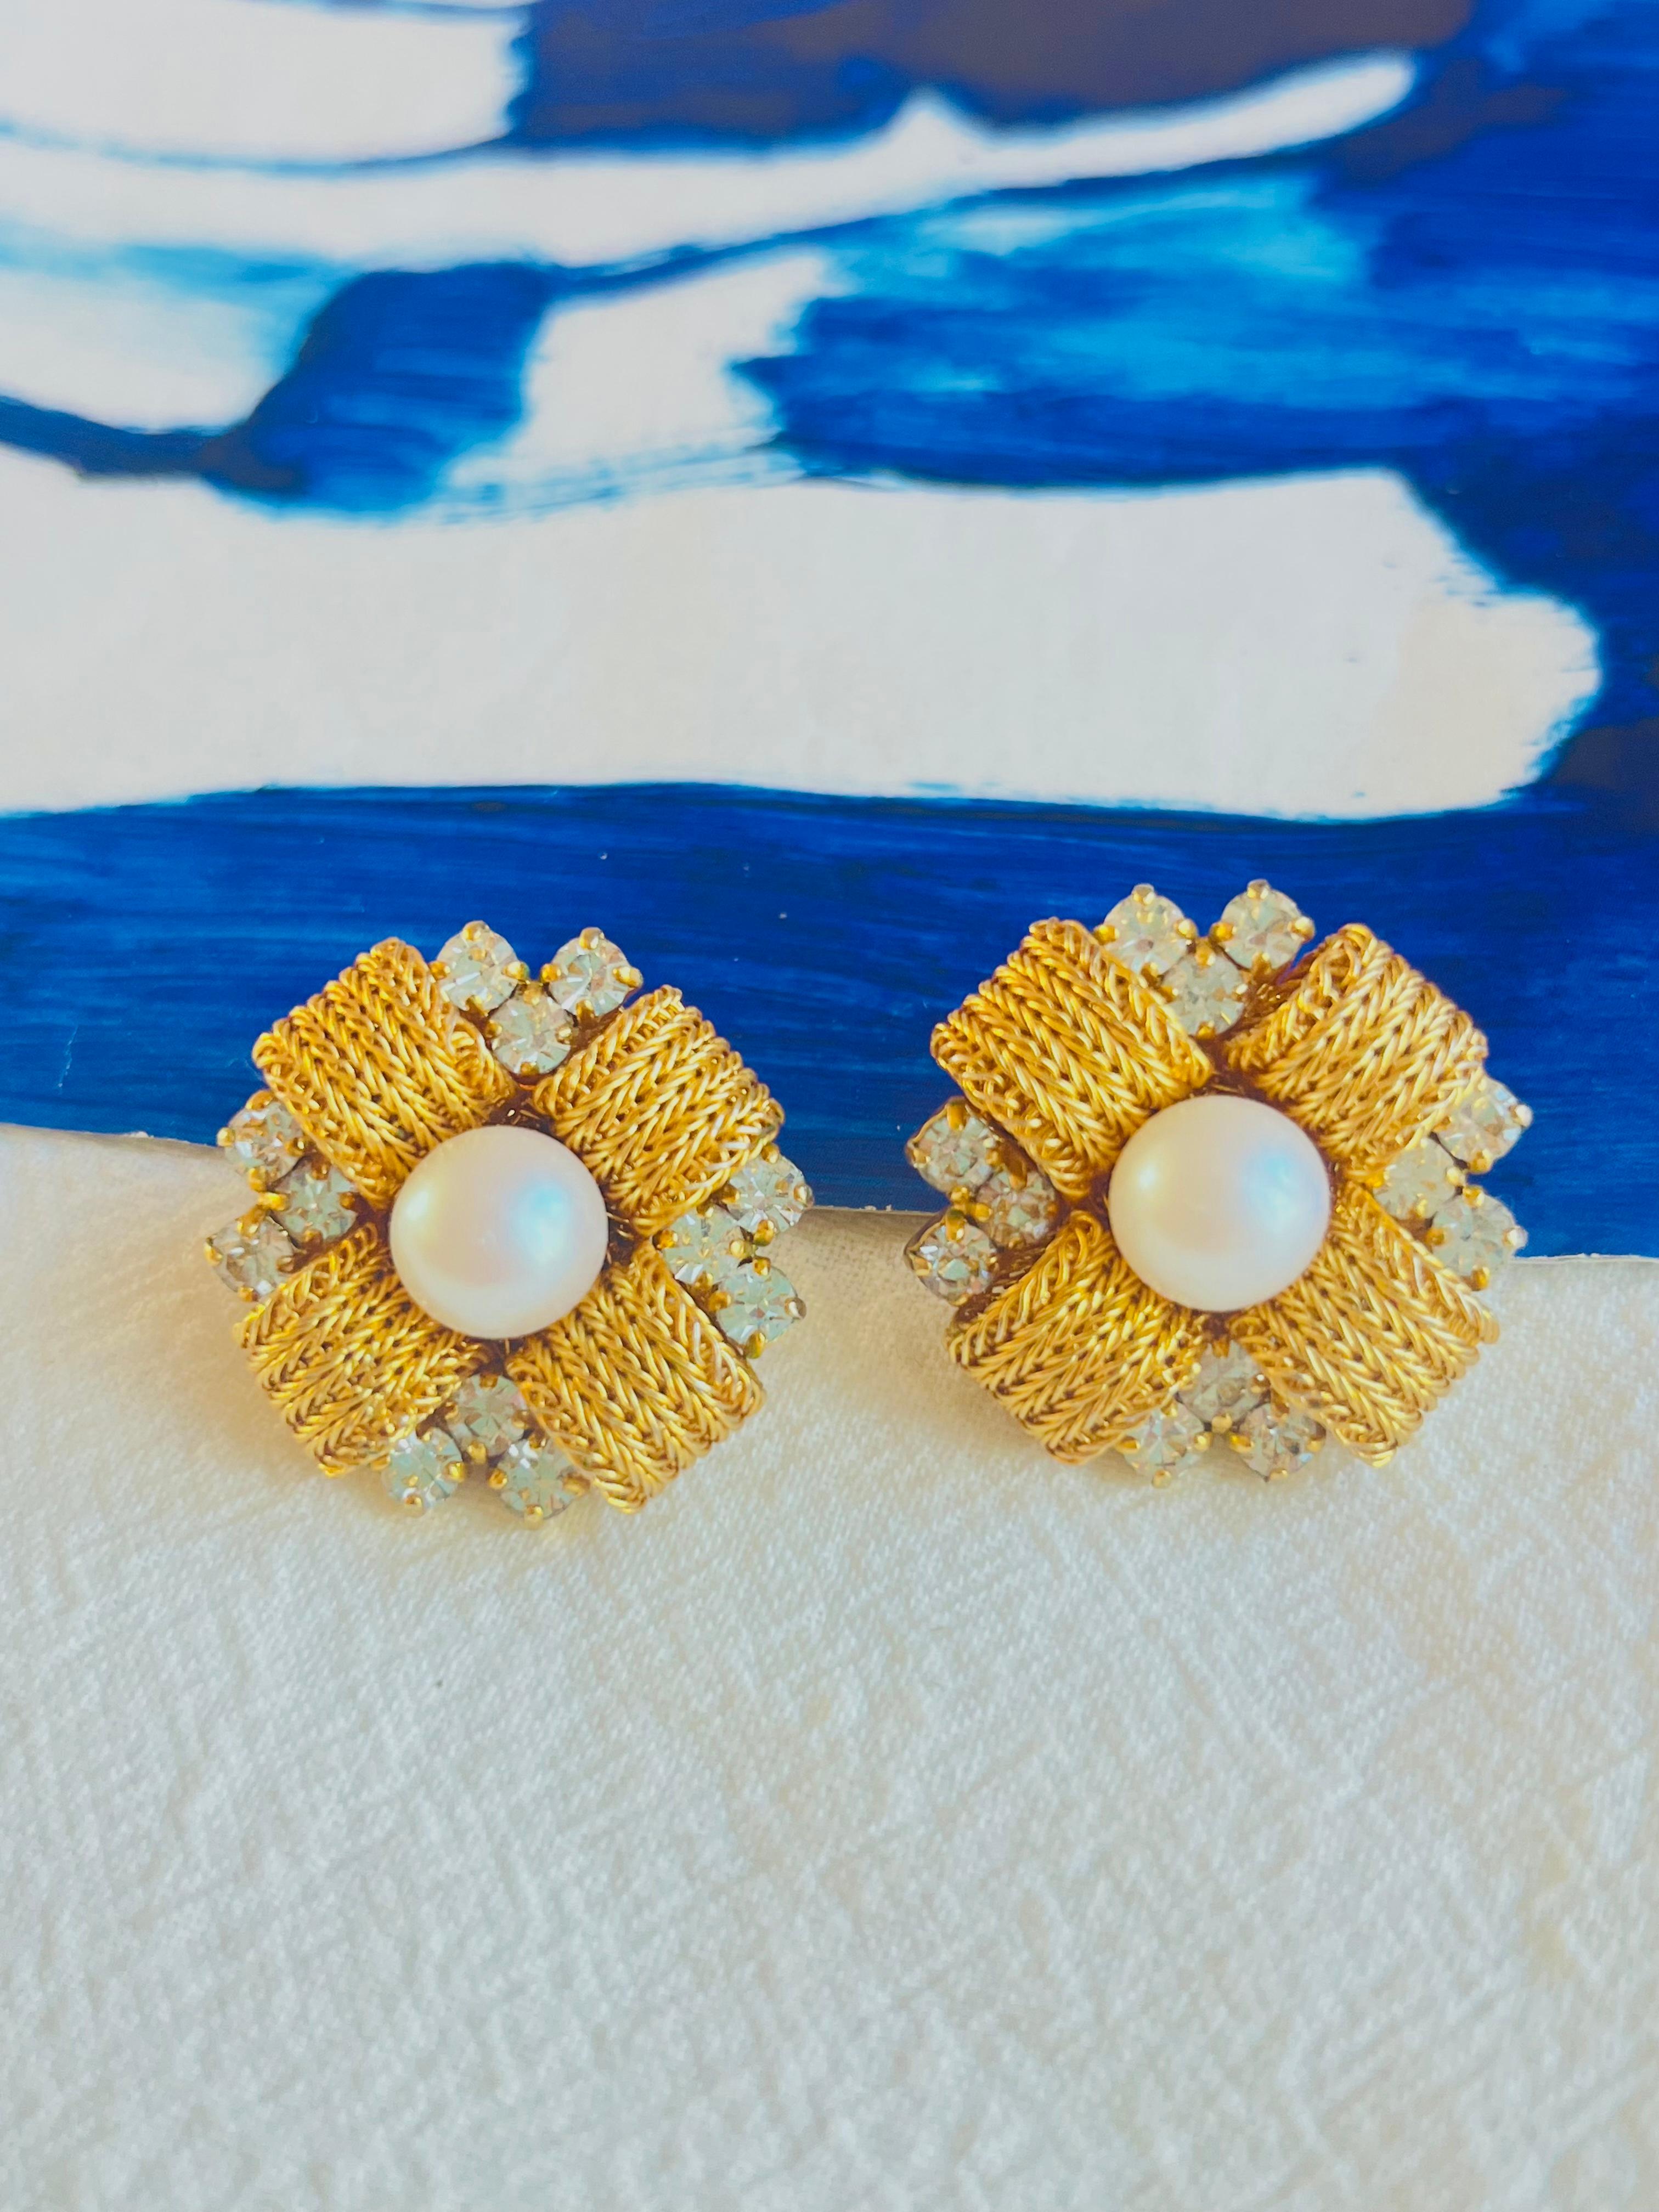 Very good condition. Some light scratches or colour loss, barely noticeable.

Vintage and rare to find. 100% Genuine.

A very beautiful pair of earrings by Chr. Dior, signed at the back.

Size: 2.7*2.7 cm.

Weight: 10.0 g/each.

_ _ _

Great for